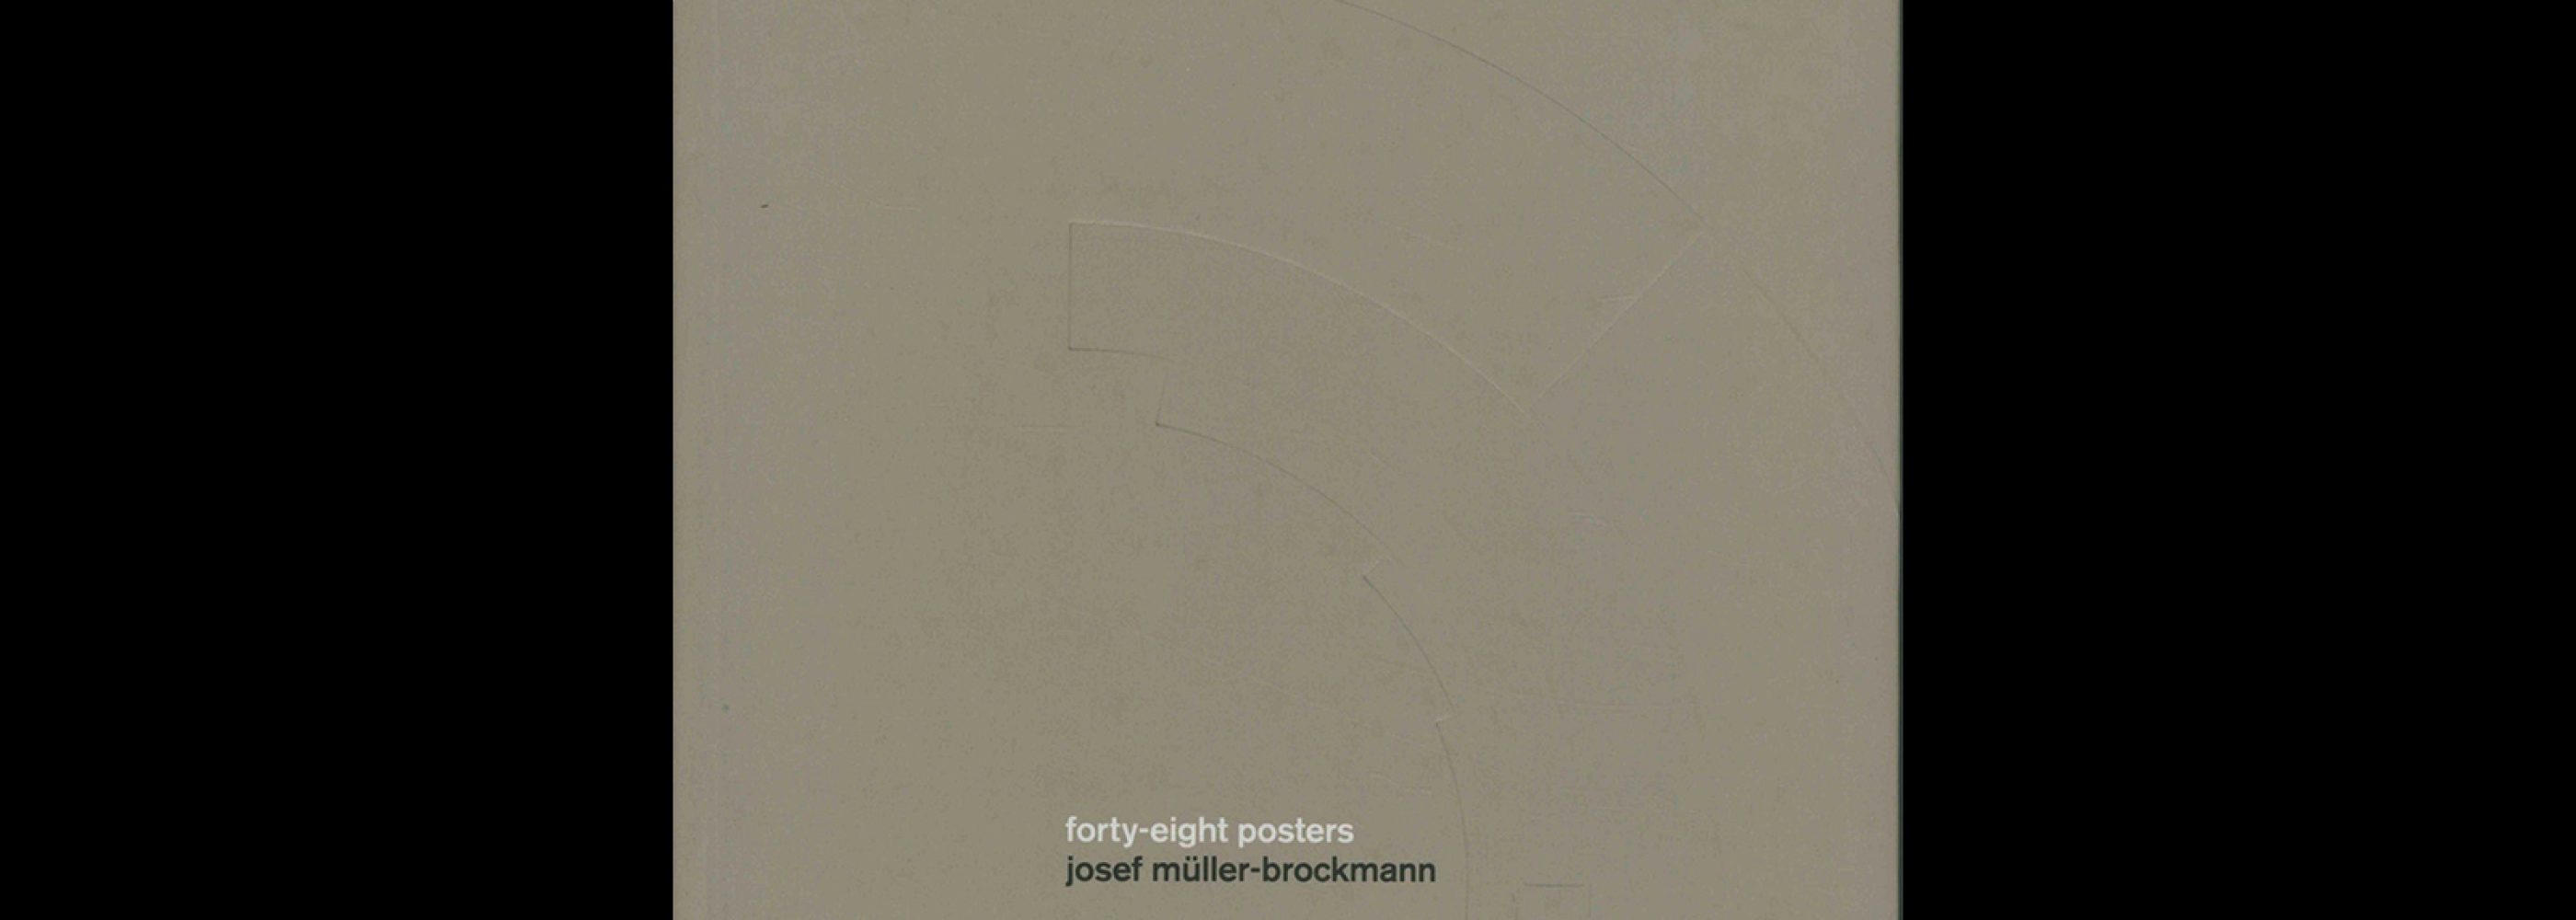 Forty-Eight Posters: Josef Muller-Brockmann, 2004